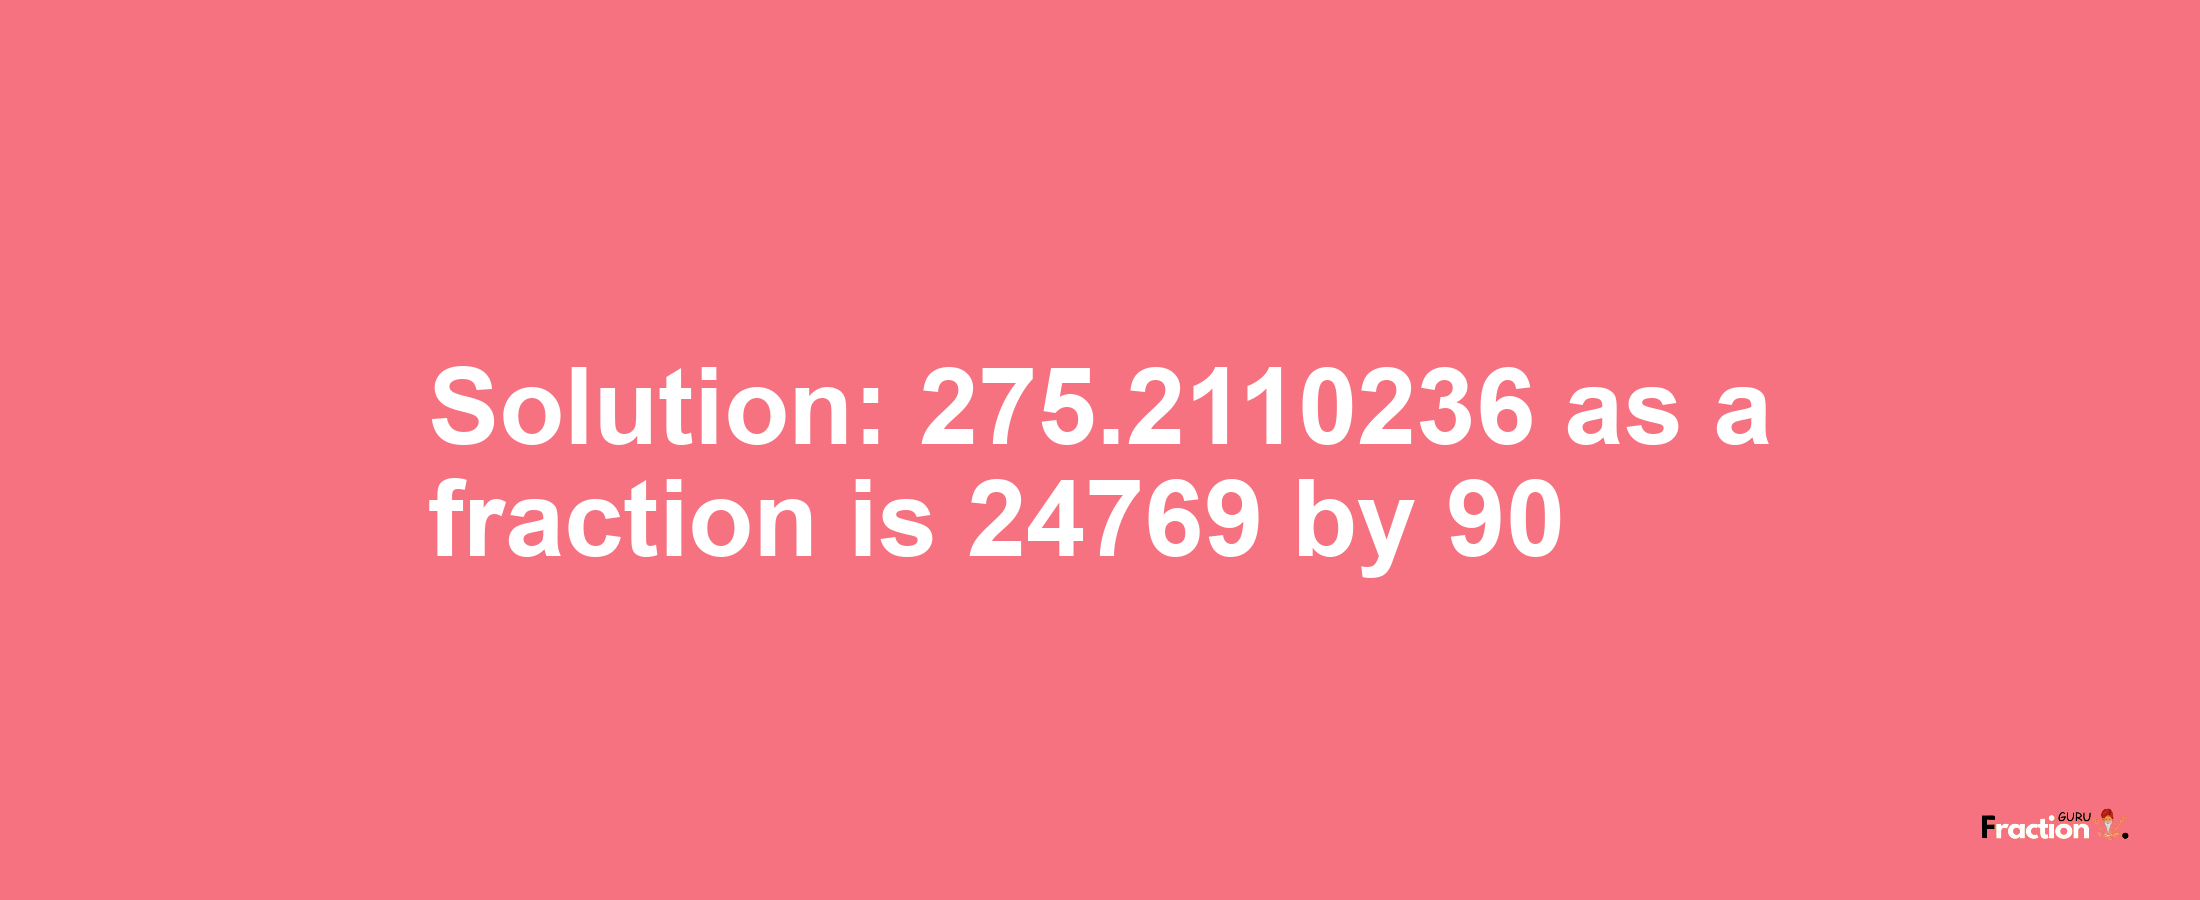 Solution:275.2110236 as a fraction is 24769/90